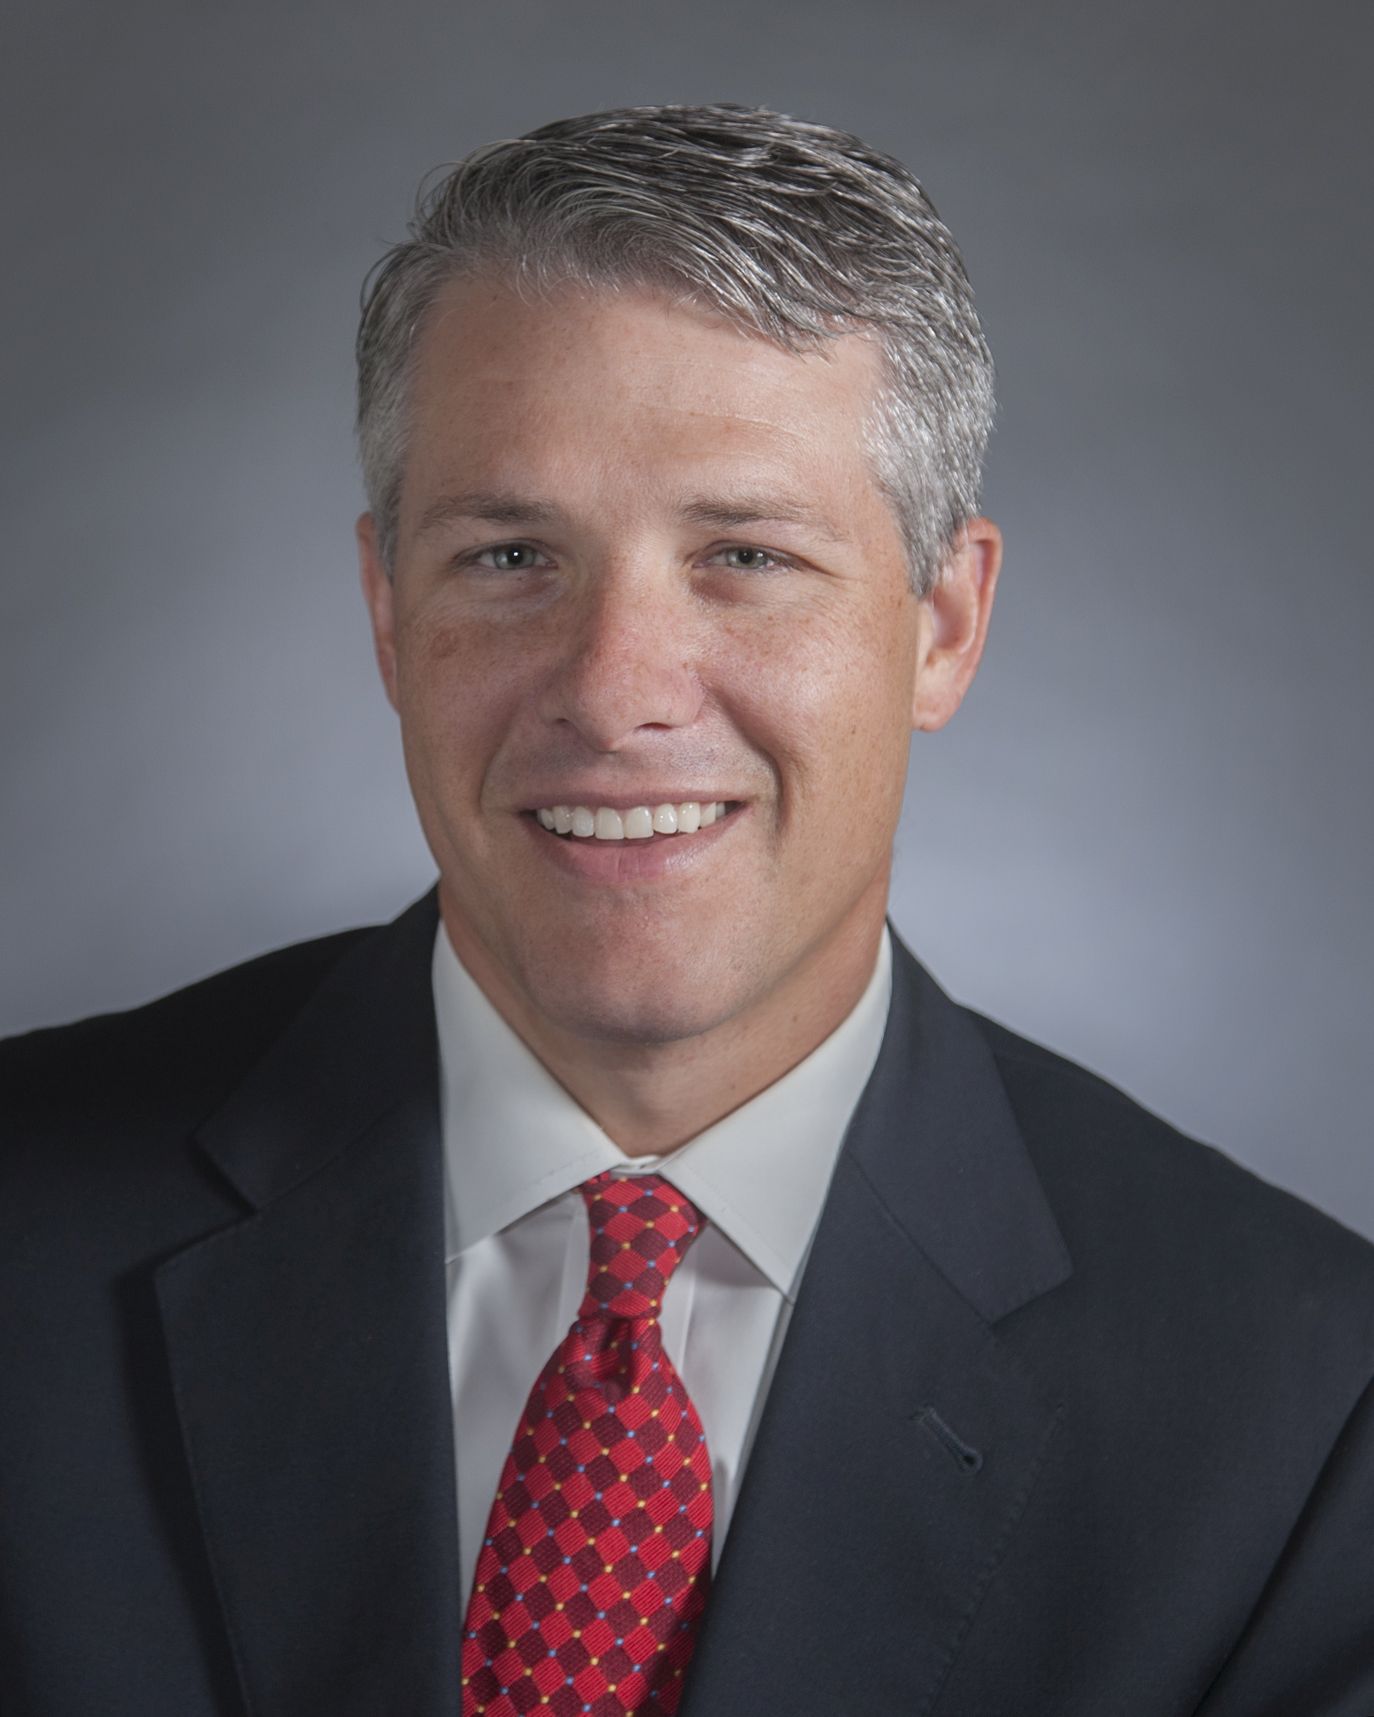 Eric J. Marshall, CFA, is President, Co-Chief Investment Officer, and Director of Research for Hodges Capital Management.